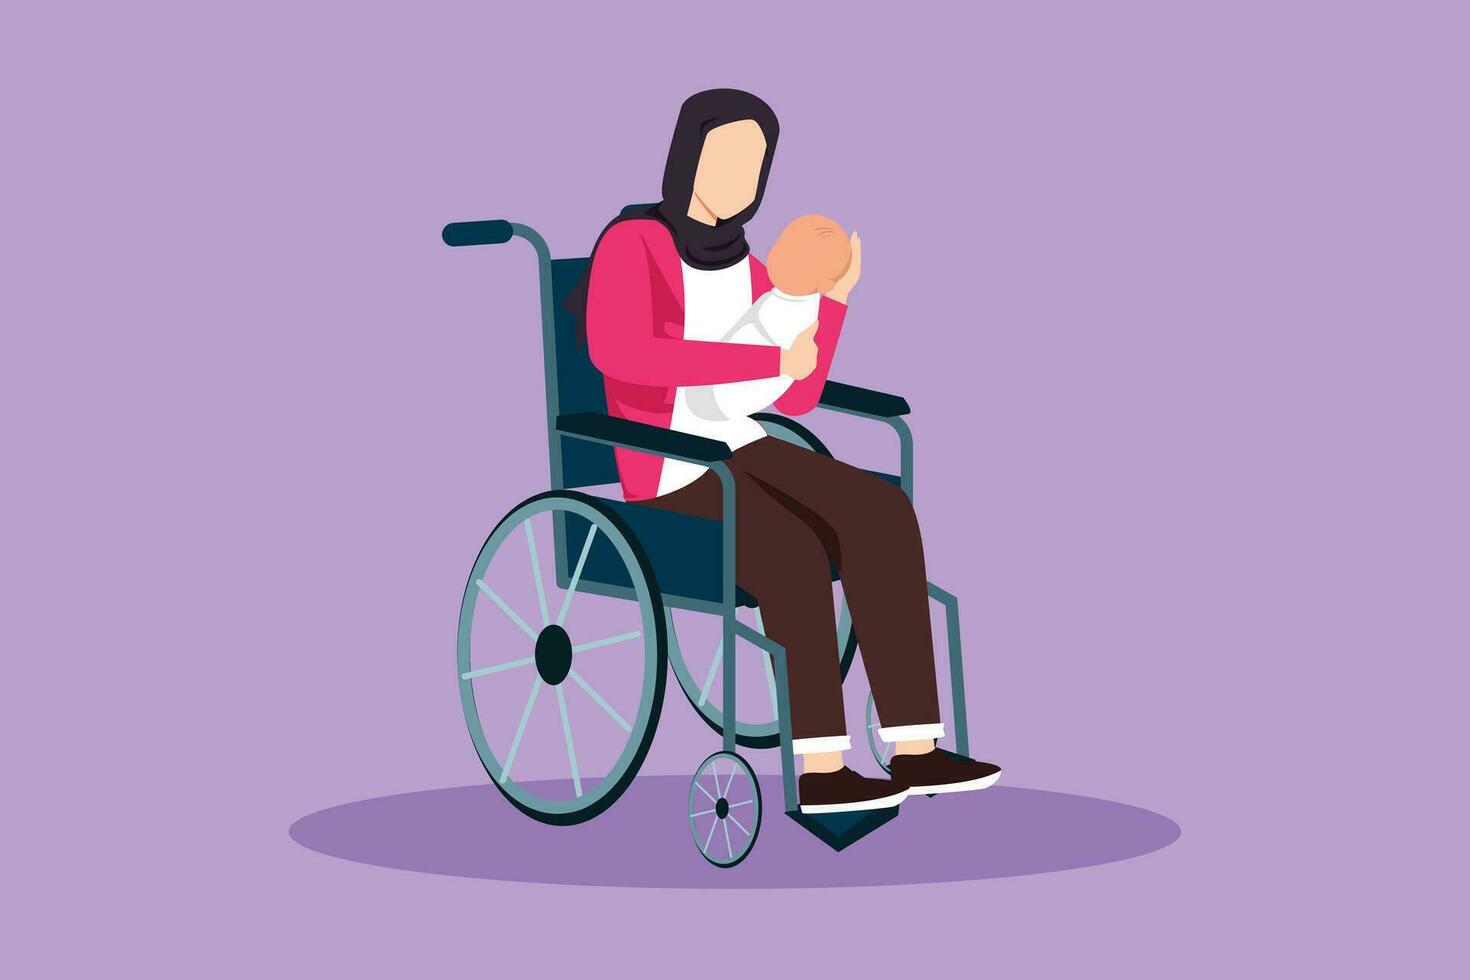 Graphic flat design drawing parents with newborn baby. Arabian woman hold baby, sitting in wheelchair. Disabled woman holding baby in her arms. Family love concept. Cartoon style vector illustration